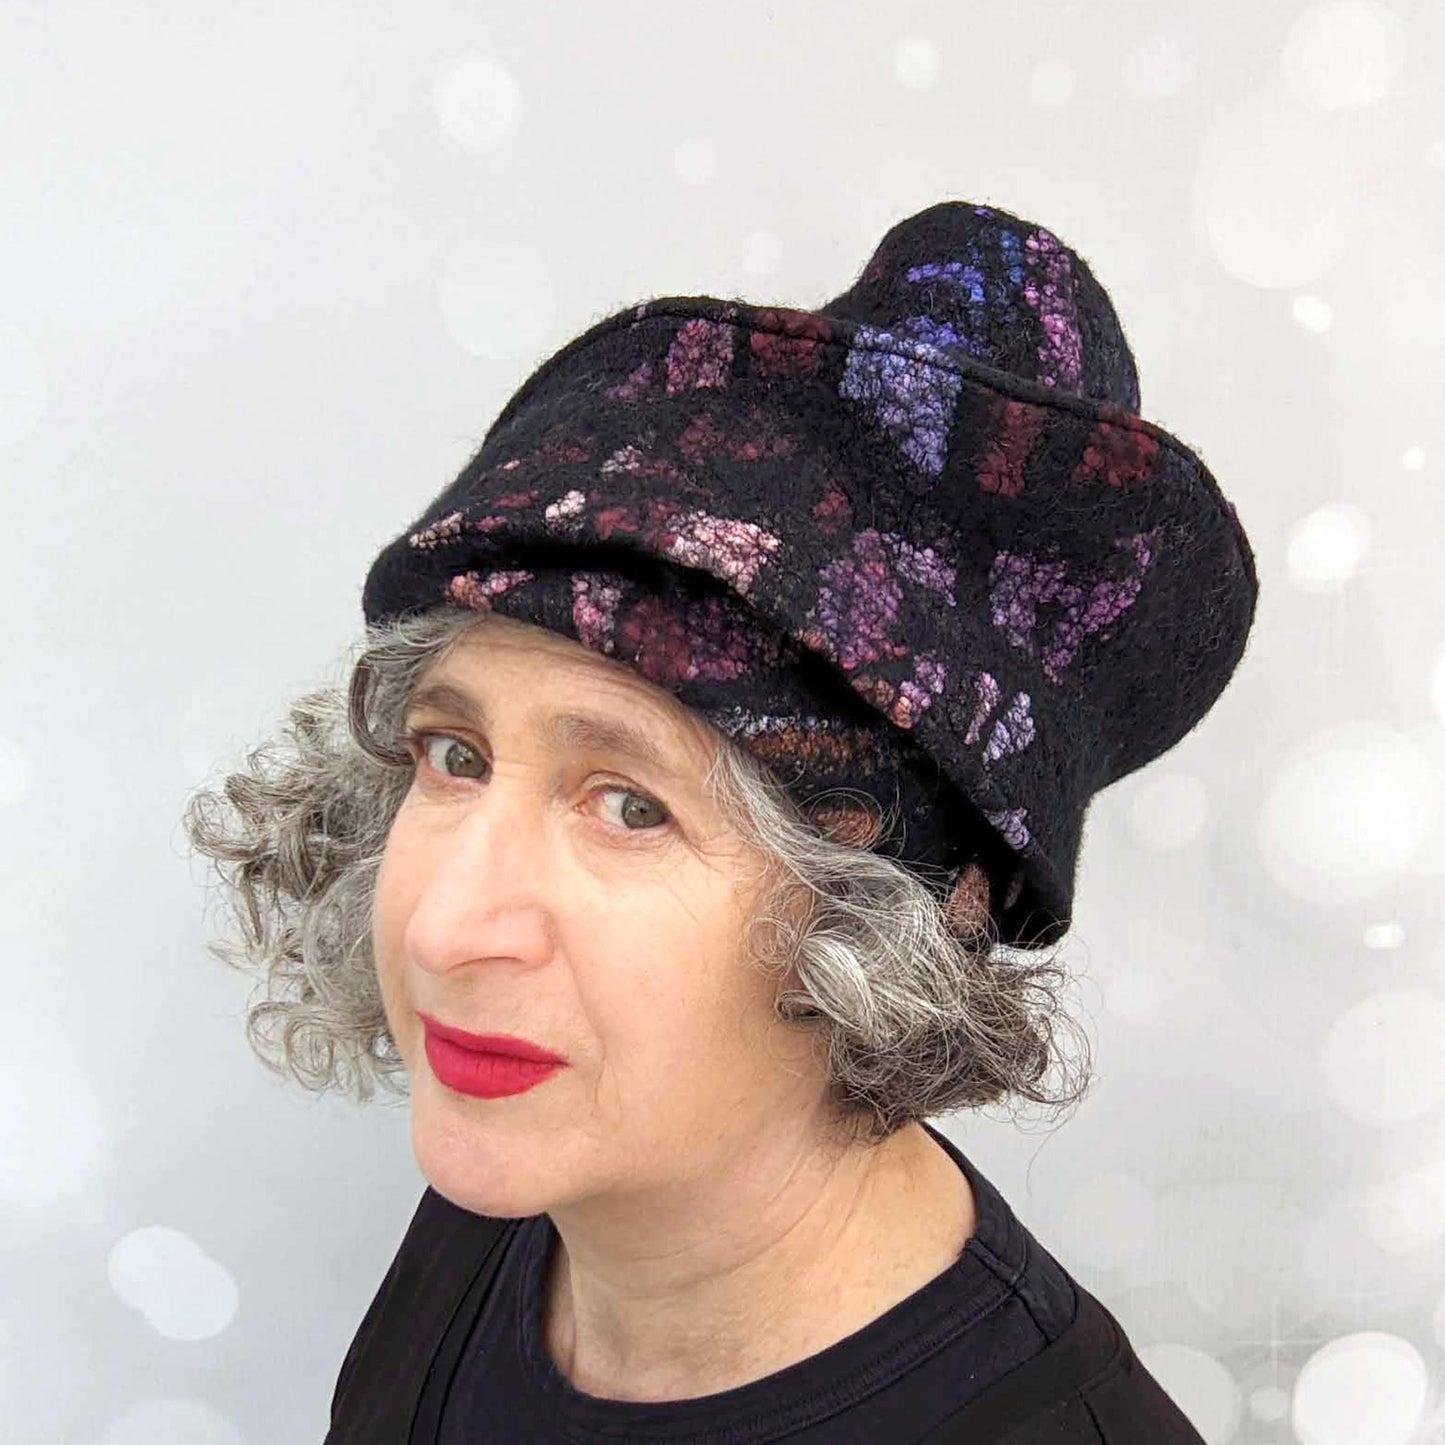 Felted Wool Toque in Black with Vibrant Stained Glass Colors - threequartersview